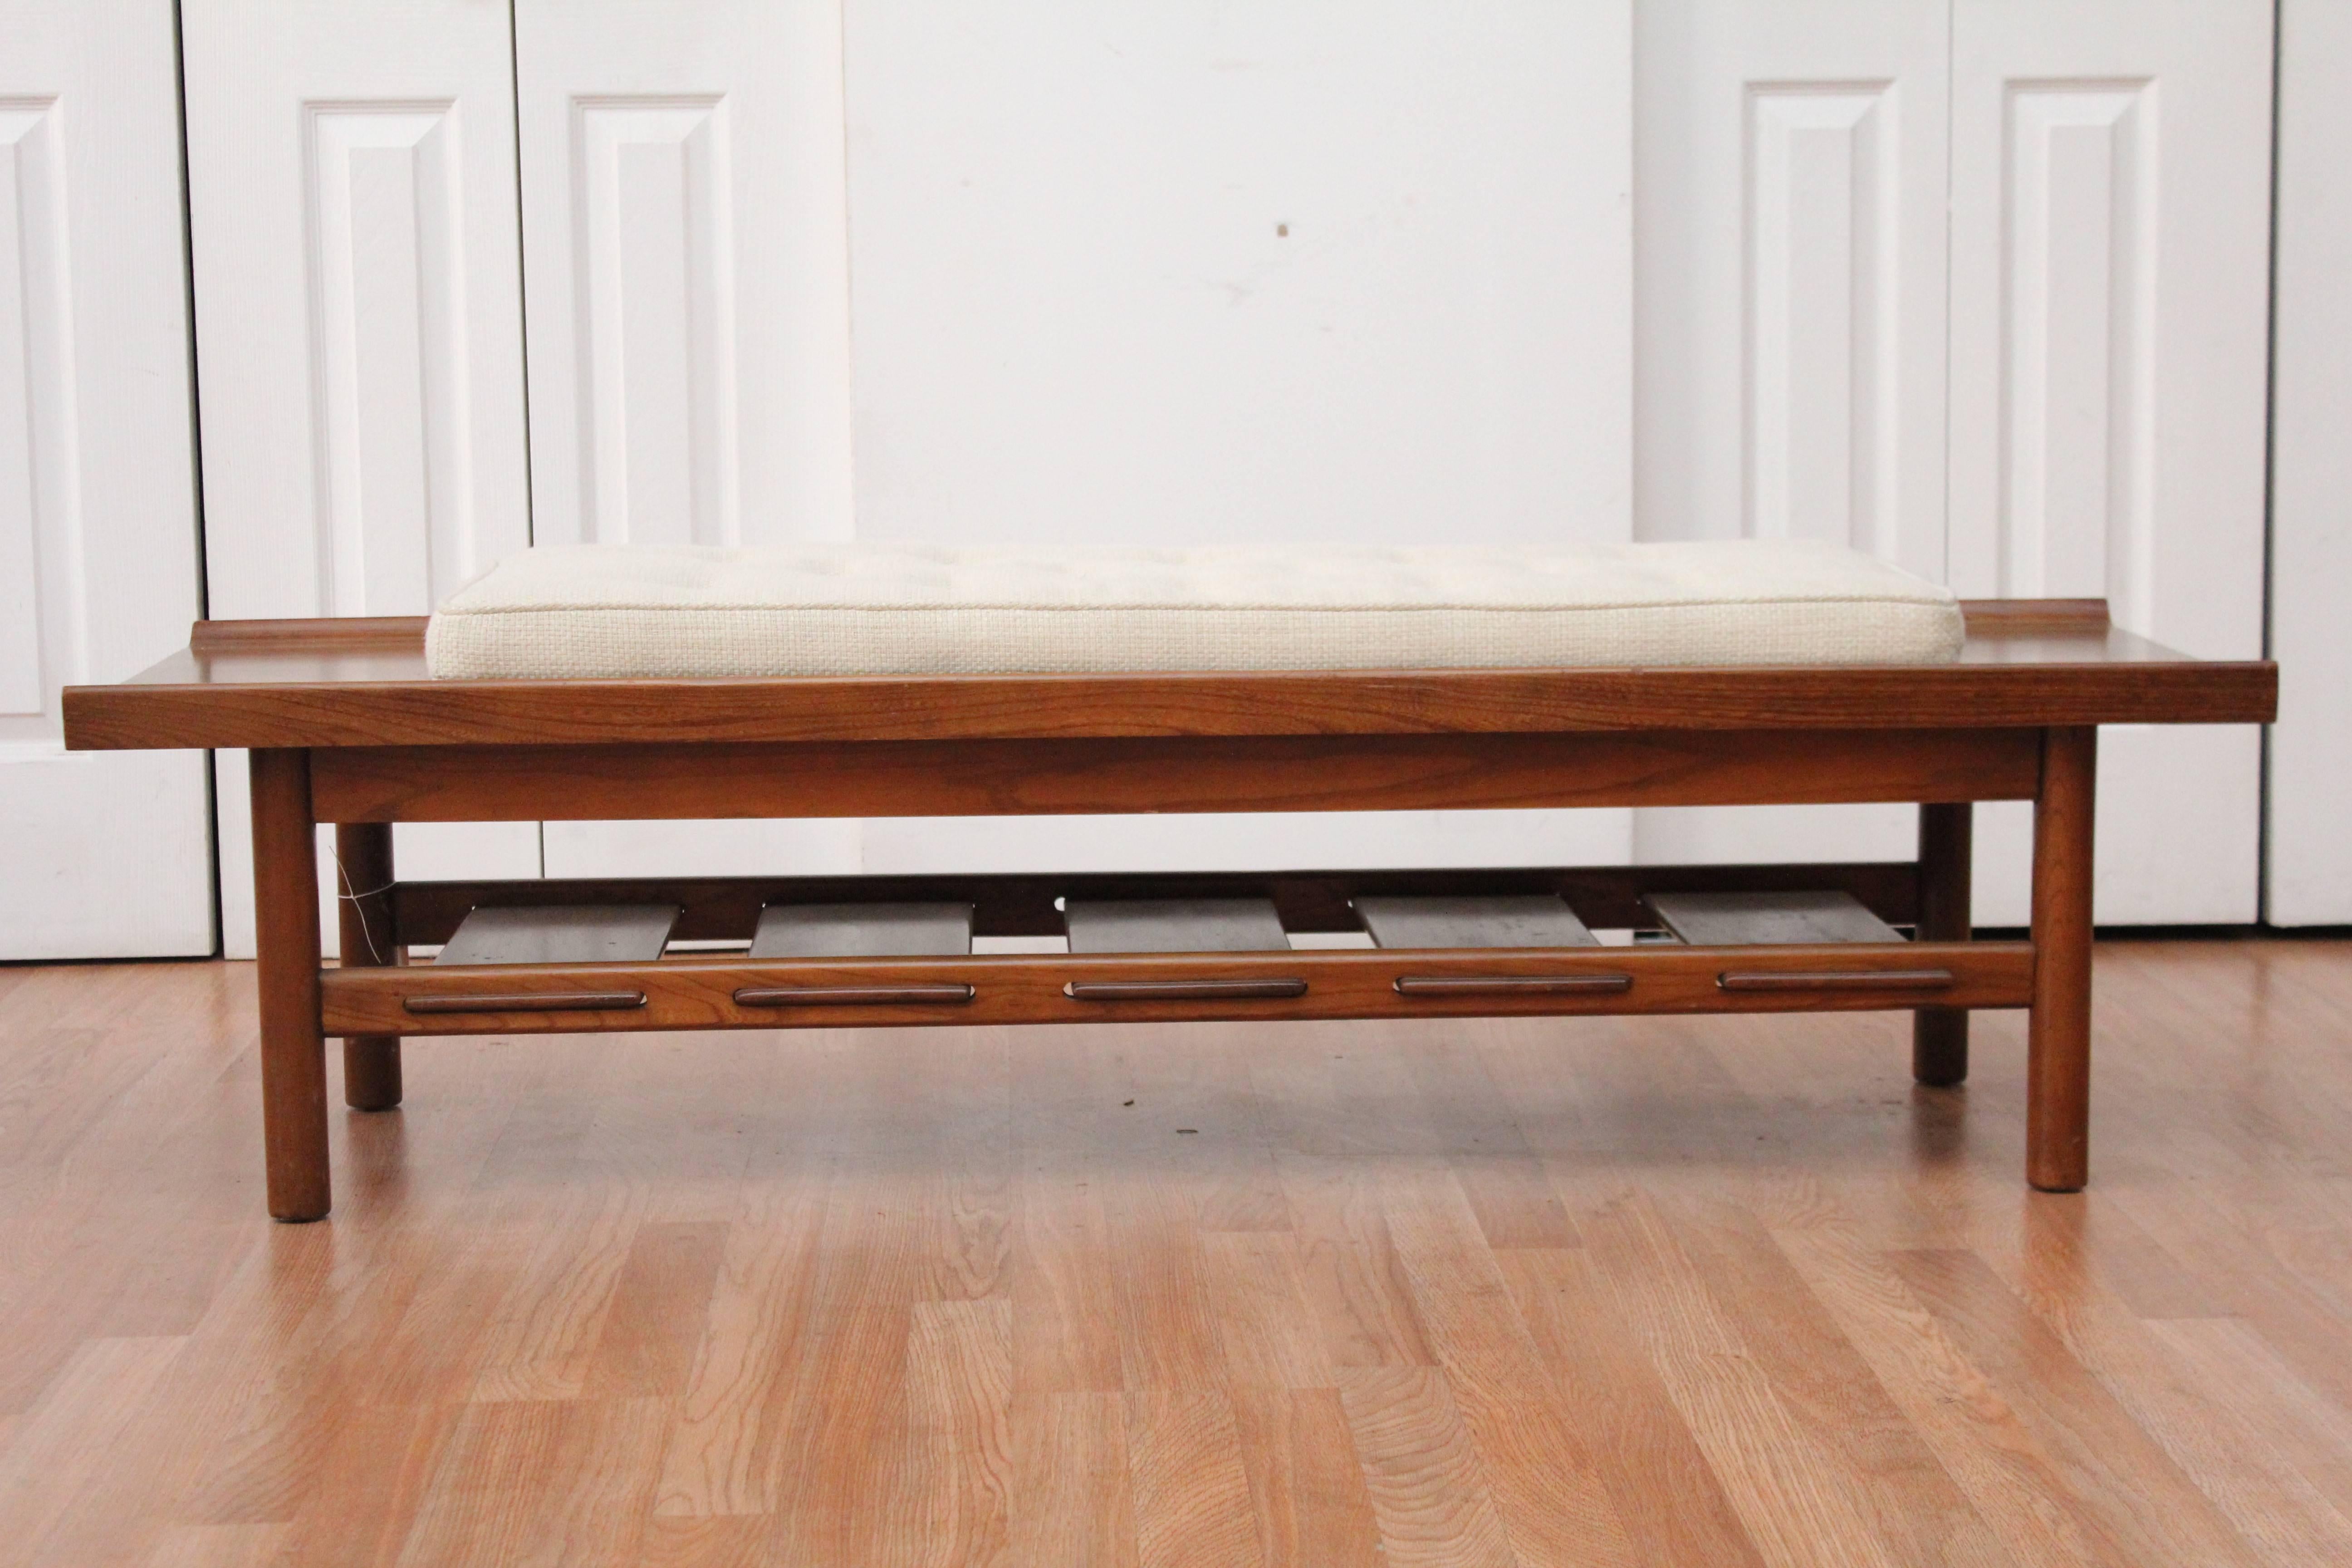 This MINT CONDITION SOLID WALNUT vintage Nemschoff bench doubles as a coffee table! Newly upholstered in 